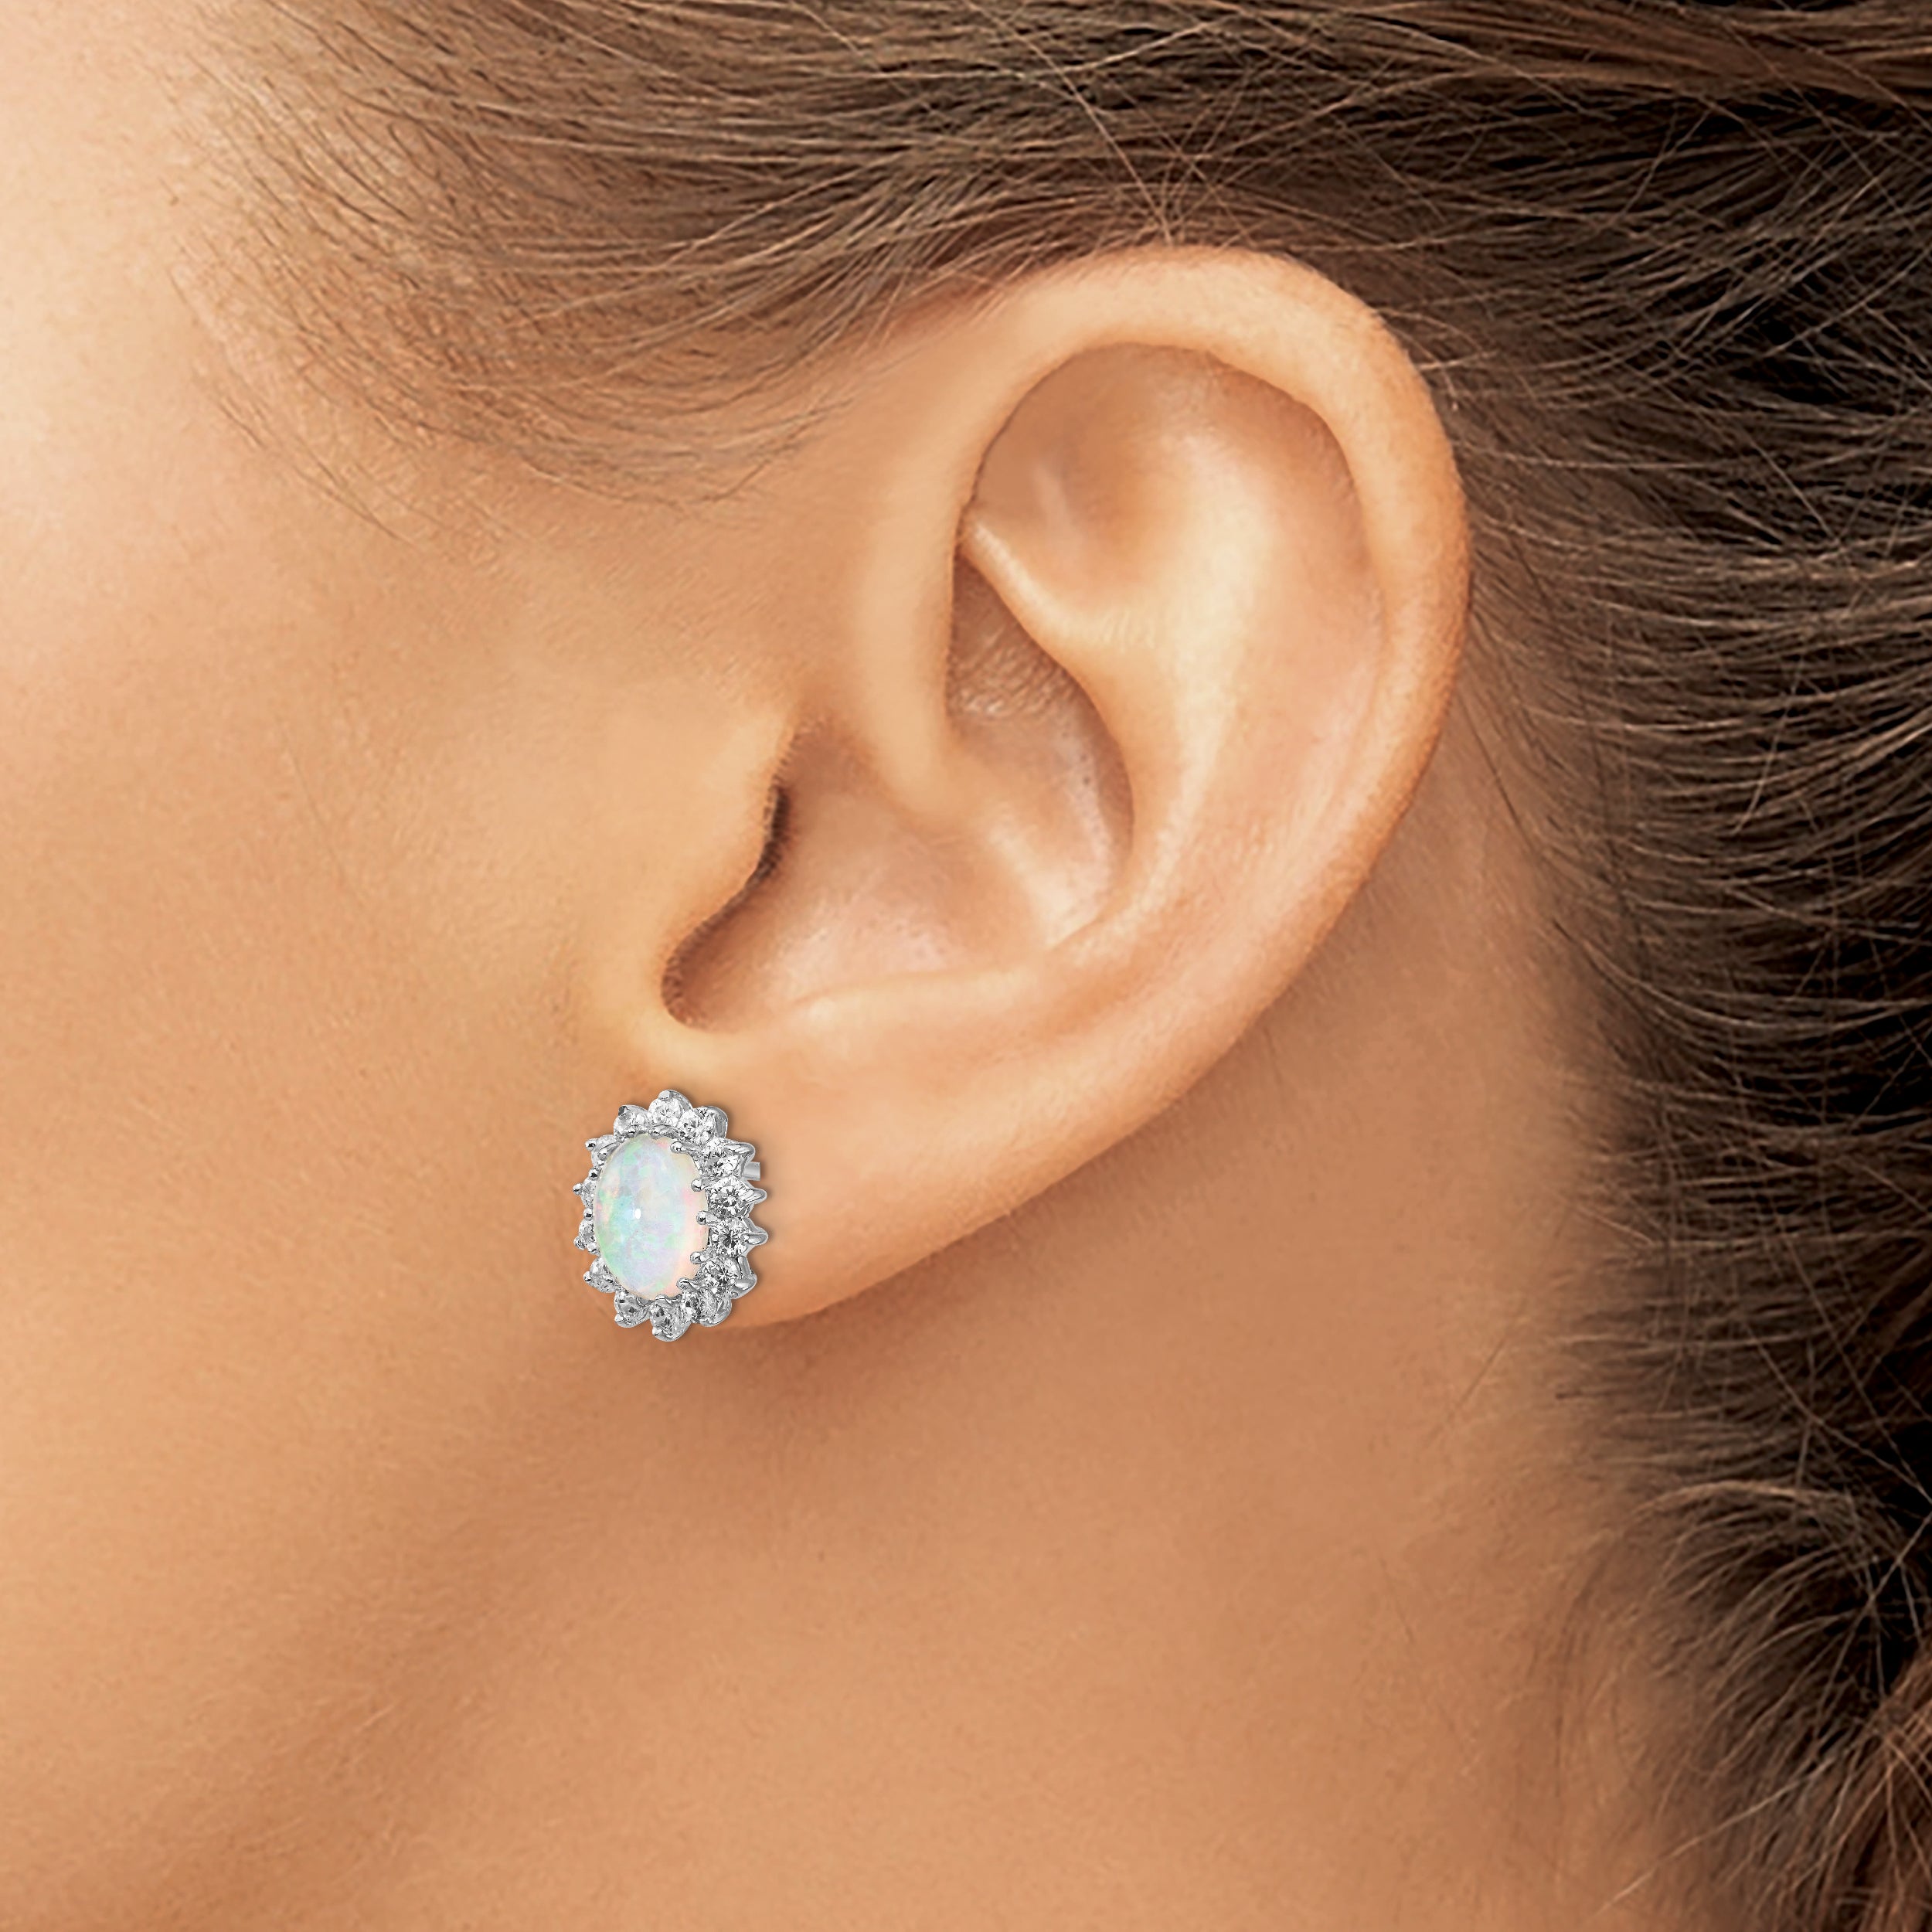 Cheryl M Sterling Silver Rhodium-plated Cabochon Lab Created Opal and Brilliant-cut CZ Oval Halo Post Earrings